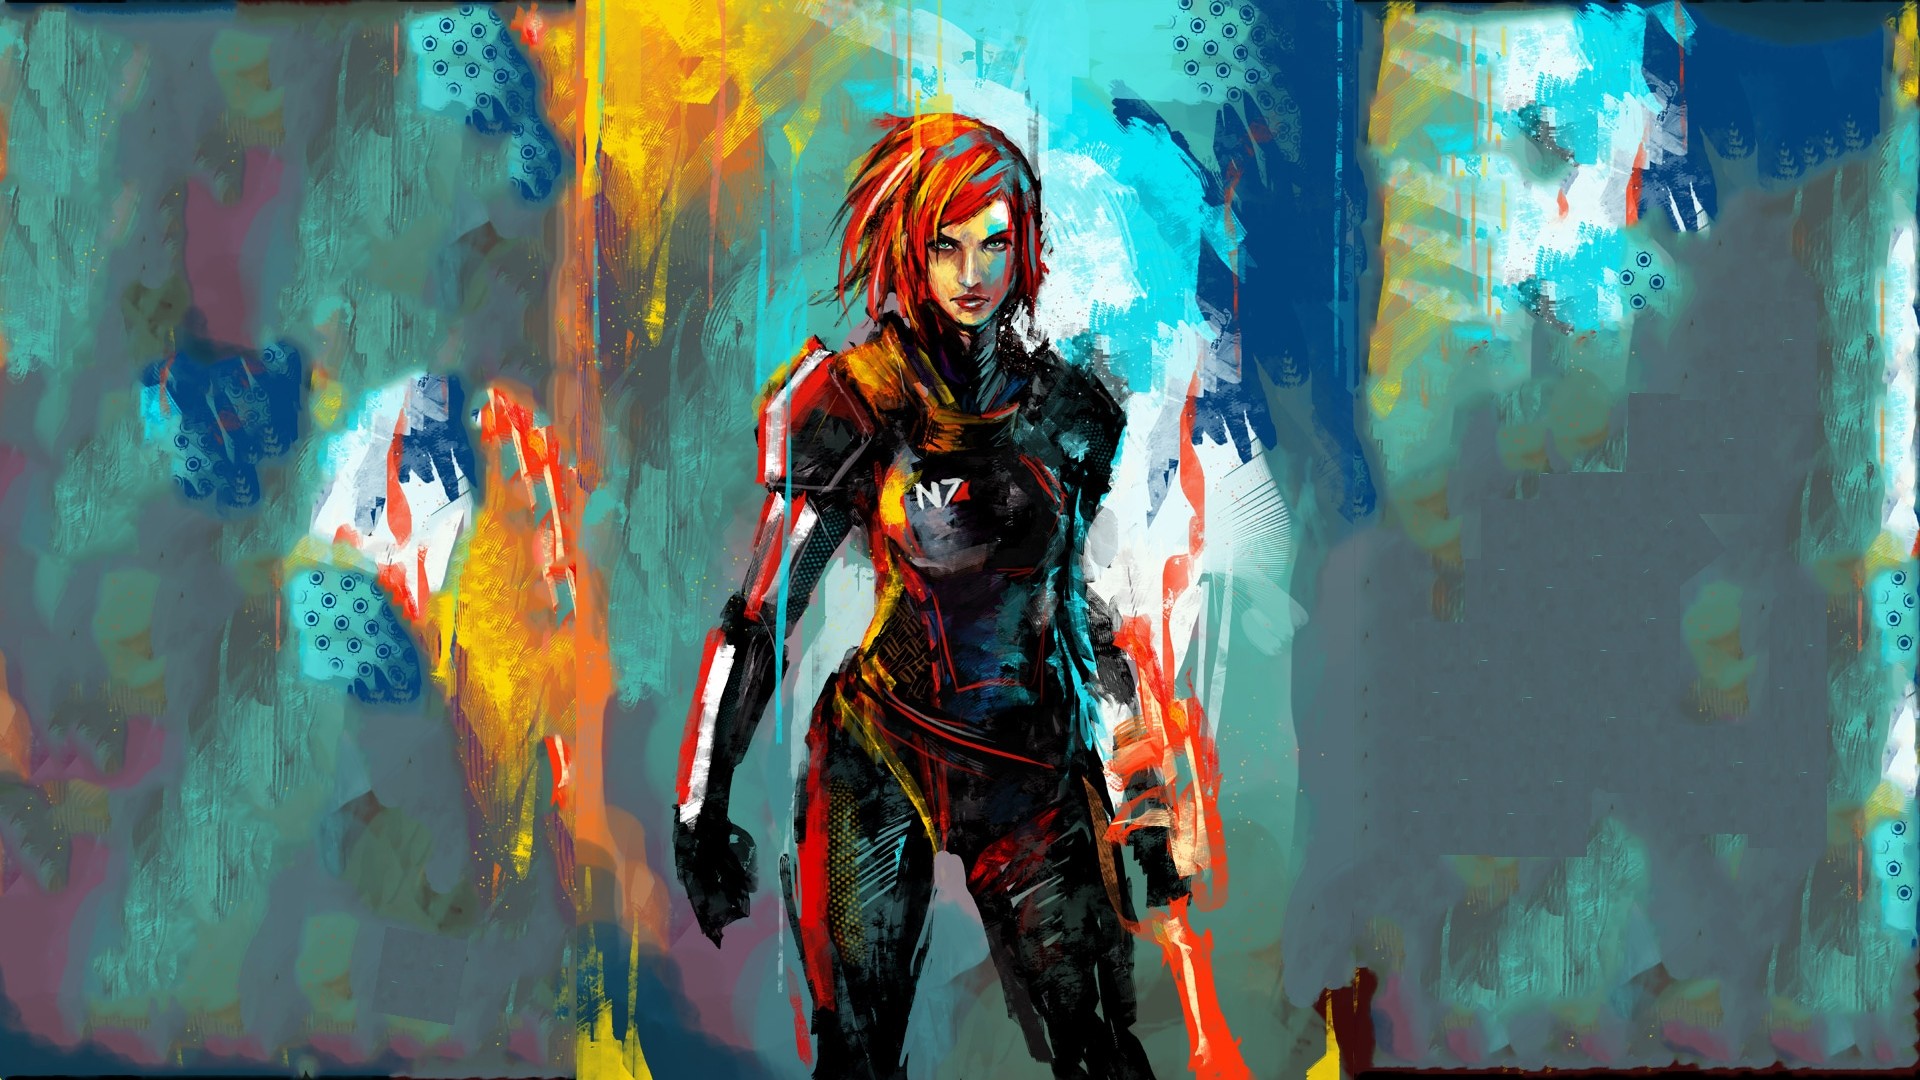 commander shepard, mass effect, video game, colors